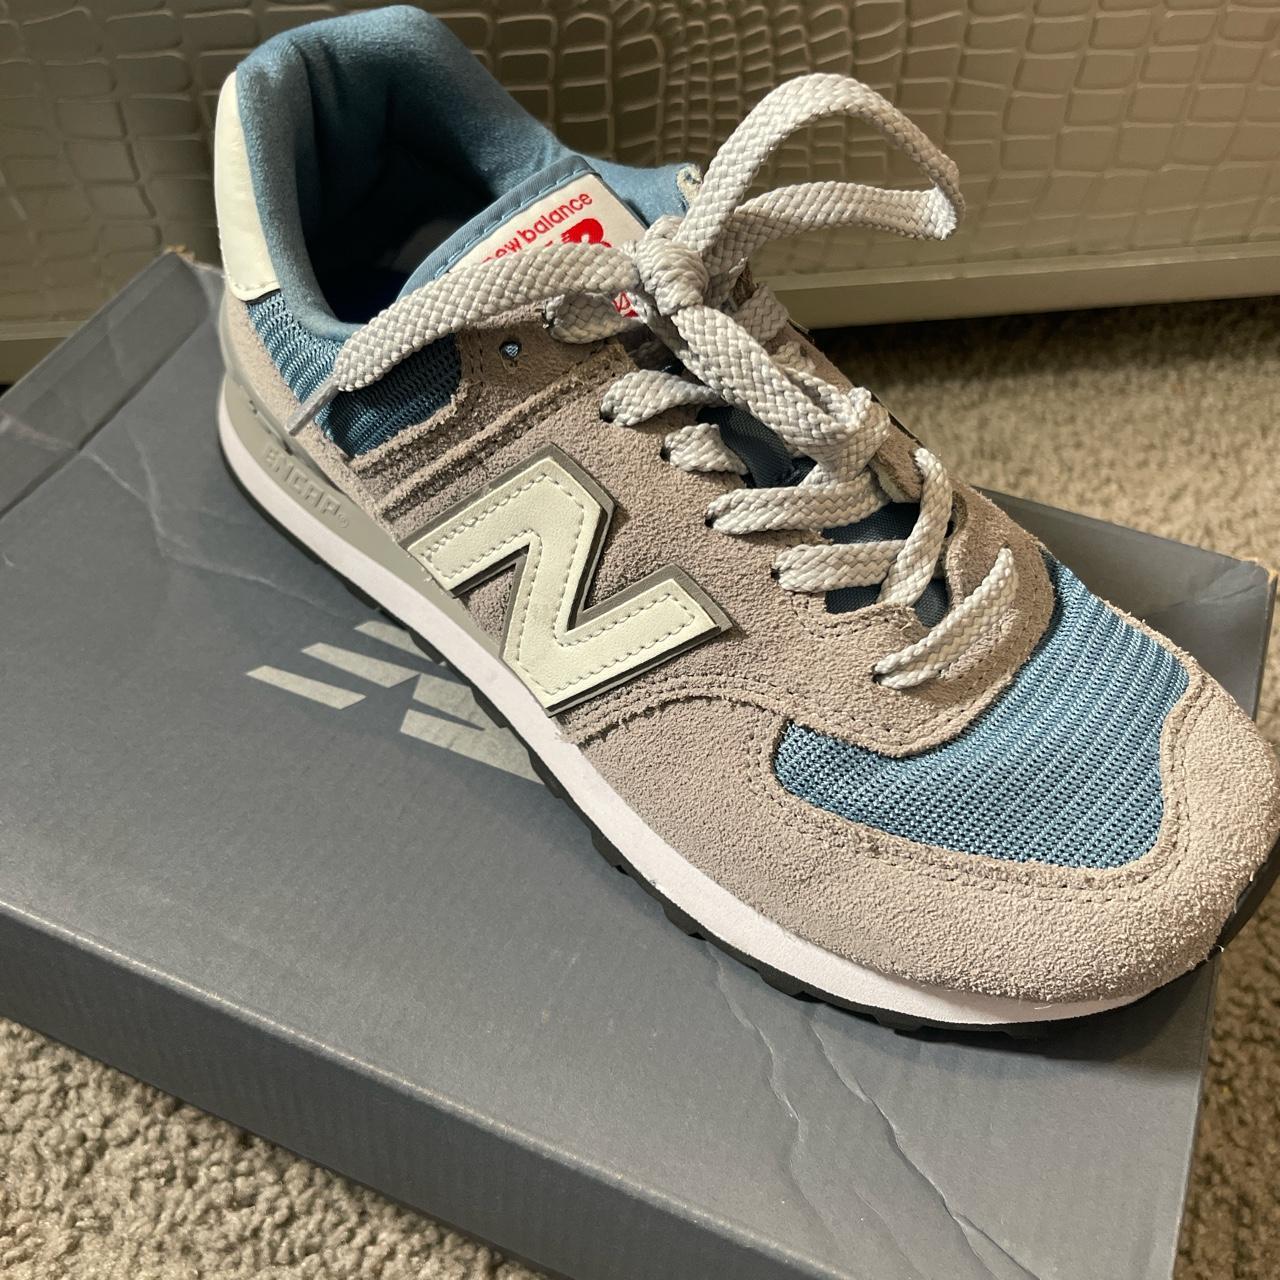 New Balance Women's Grey and Blue Trainers